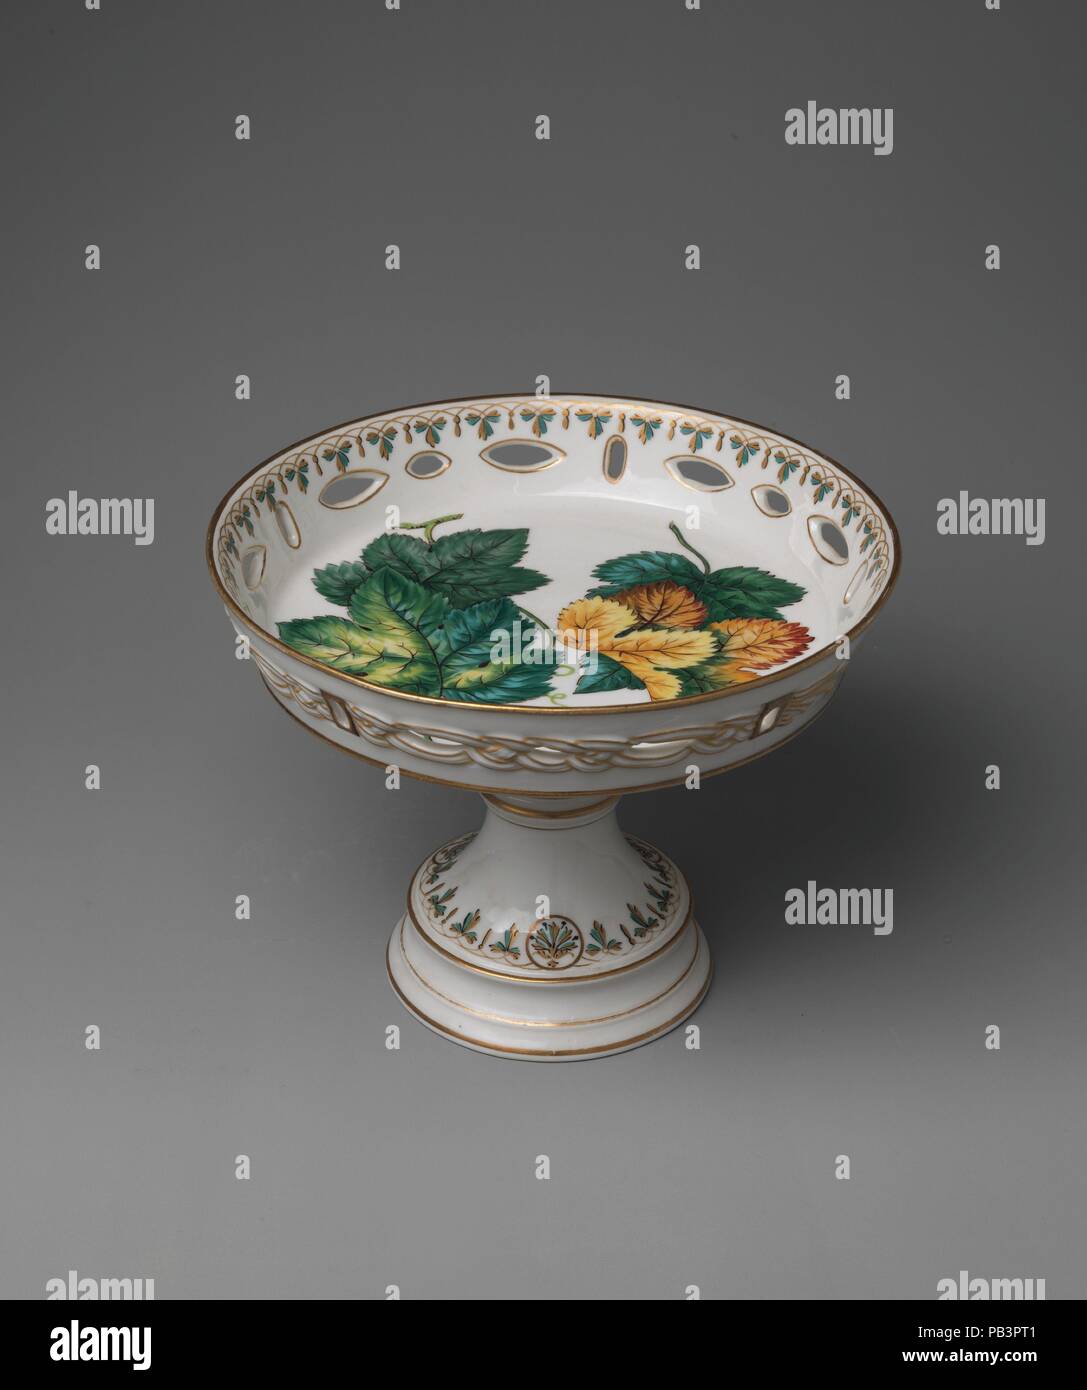 Compote. Culture: American. Dimensions: H. 7 in. (17.8 cm); Diam. 9 1/4 in. (23.5 cm). Maker: Union Porcelain Works (1863-ca. 1922). Date: 1885.  Union Porcelain Works was one of the most important and inventive American porcelain manufacturers in the second-half of the nineteenth century. In addition to their imaginative works designed by the German-born artistic director, Karl H. L. Müller, the firm's mainstay was the production of heavy porcelain hotel dinnerware. This extensive service was made by Thomas Carll Smith, head of the Union Porcelain Works, as a gift to his daughter, Pastora For Stock Photo